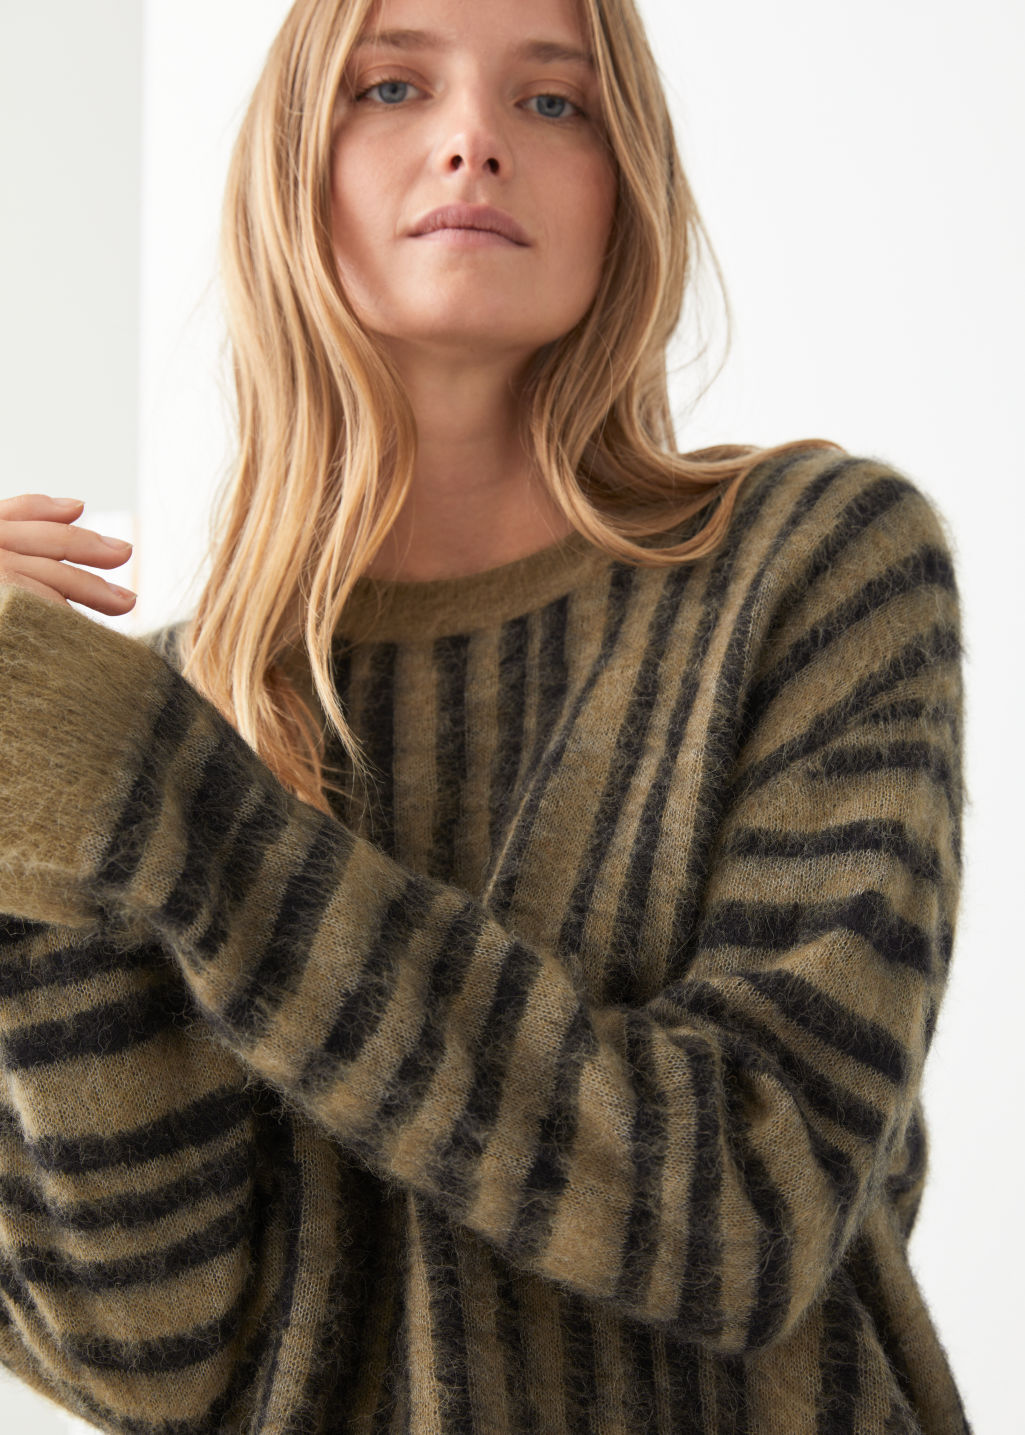 Fuzzy Knit Sweater - Black Stripes - Sweaters - & Other Stories